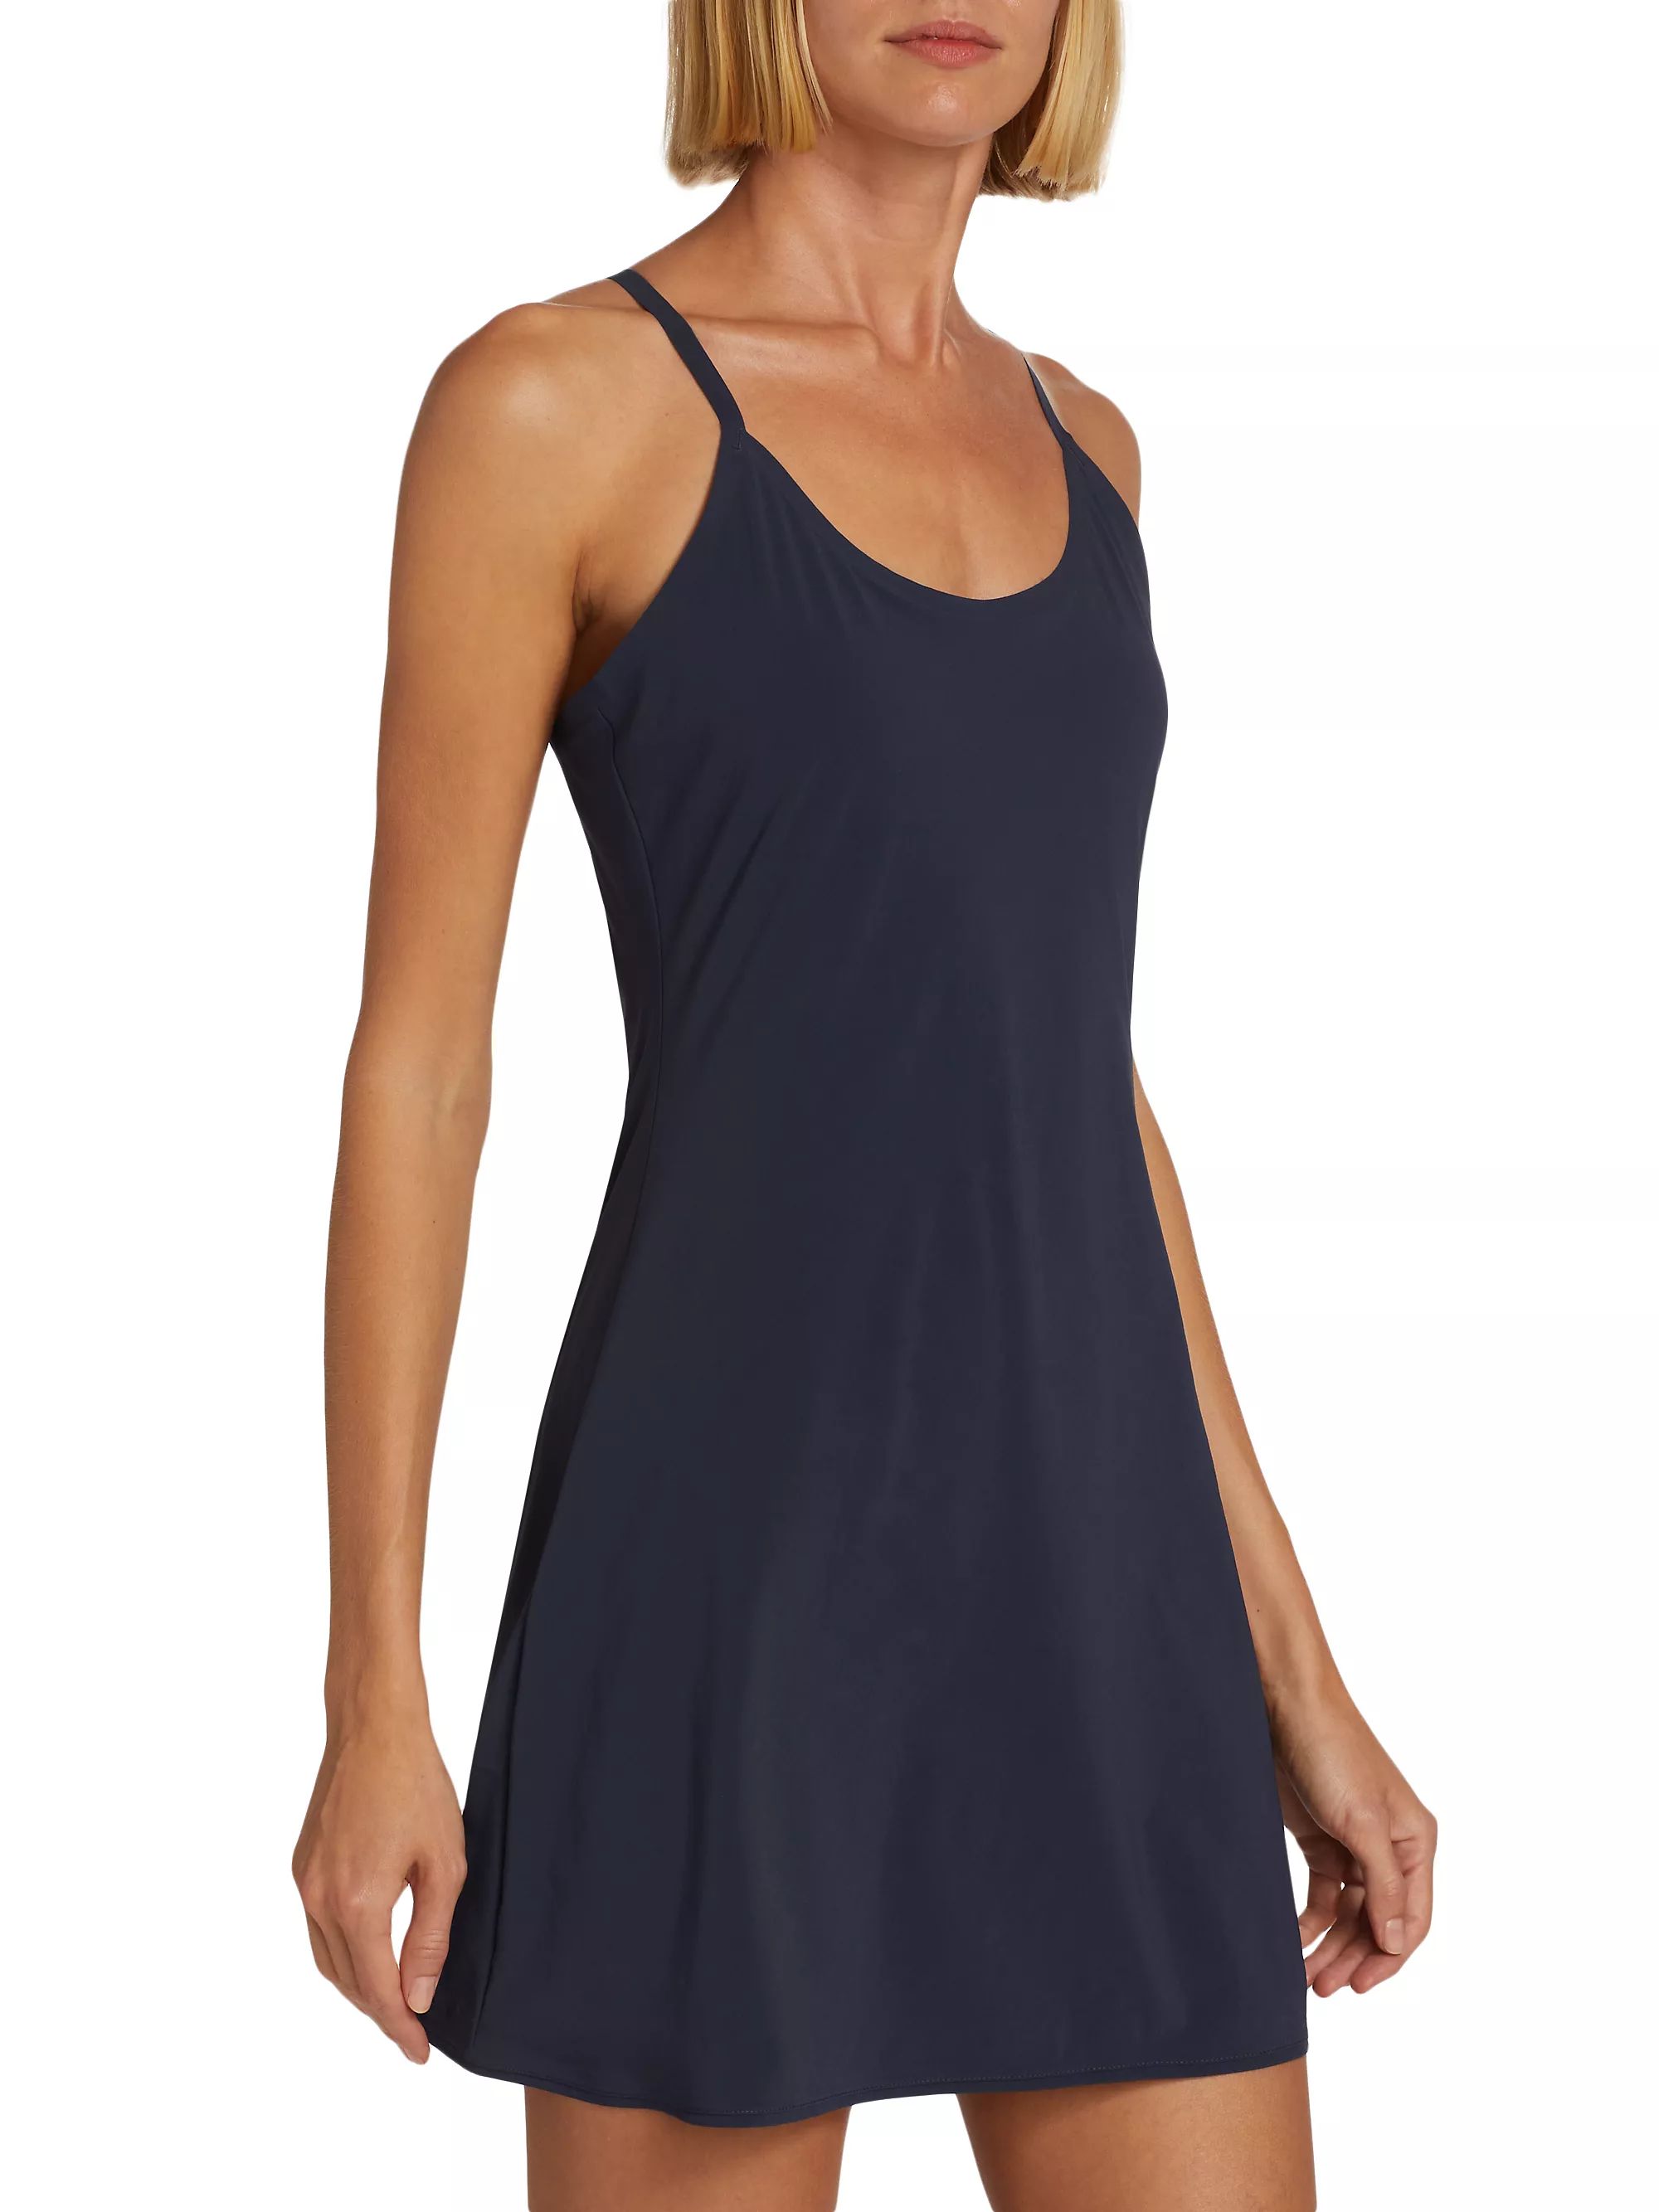 The Exercise Dress | Saks Fifth Avenue